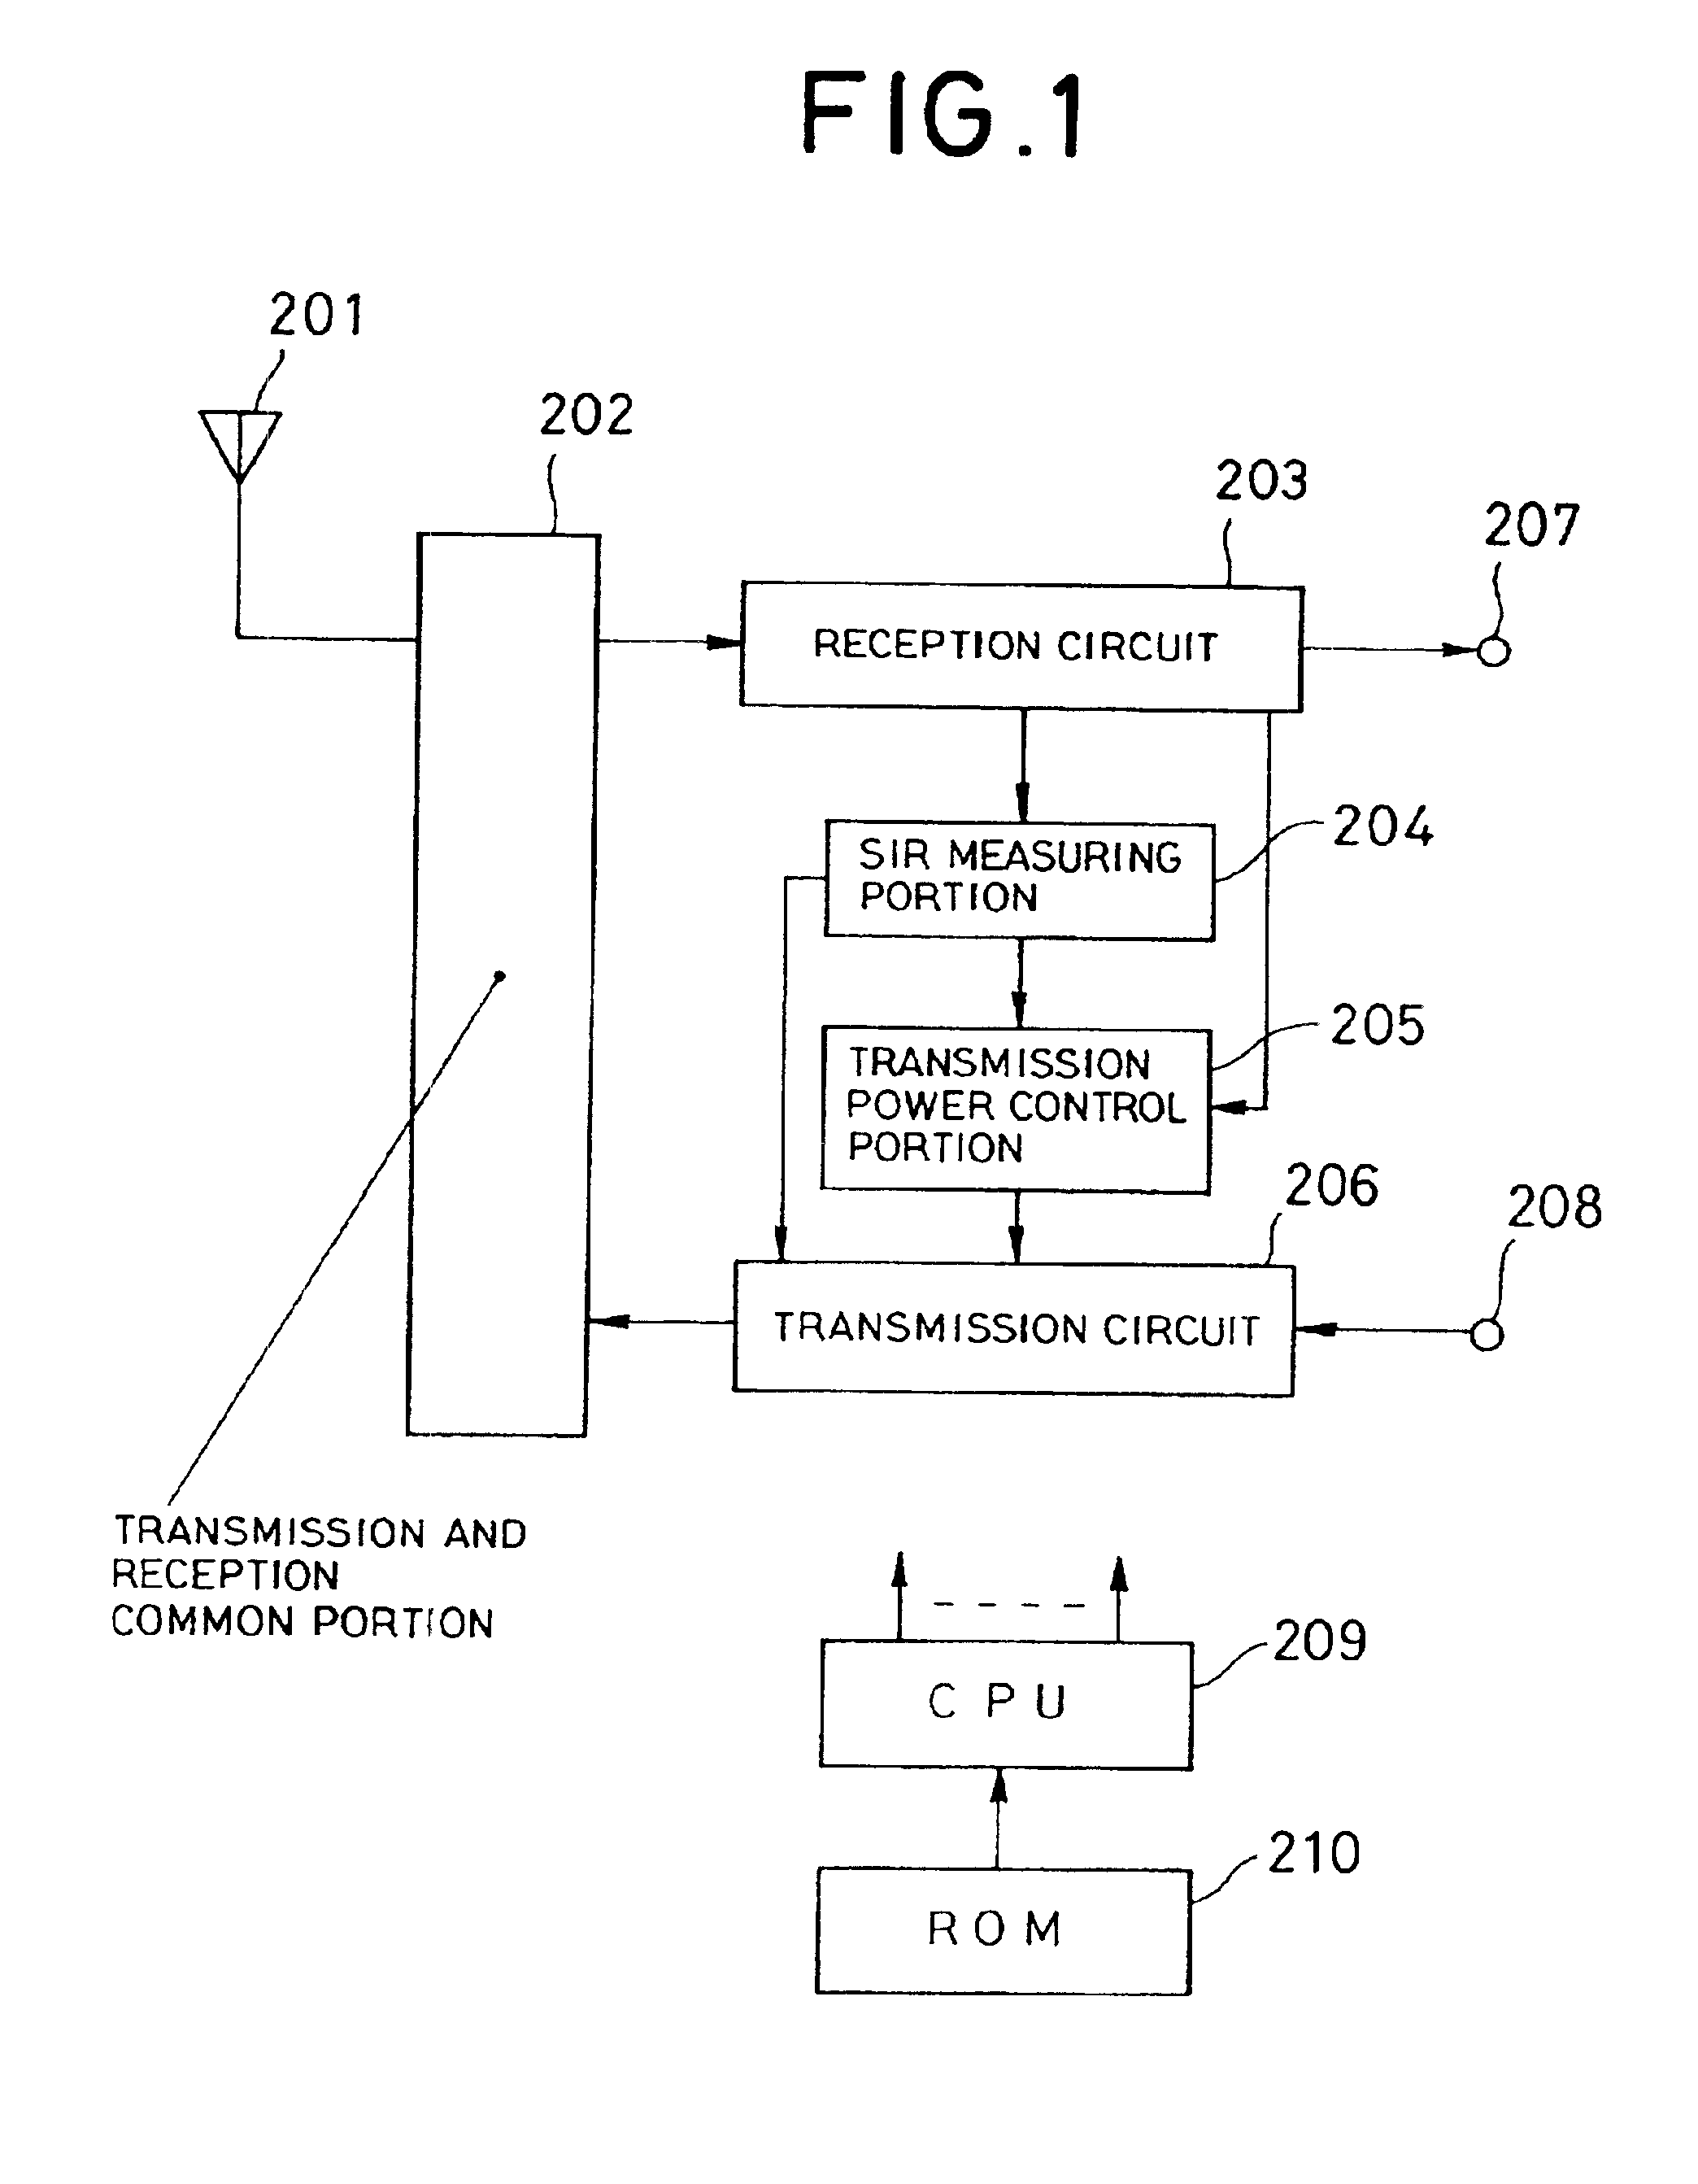 Apparatus and method for transmission power balance adjustment in a mobile cellular system